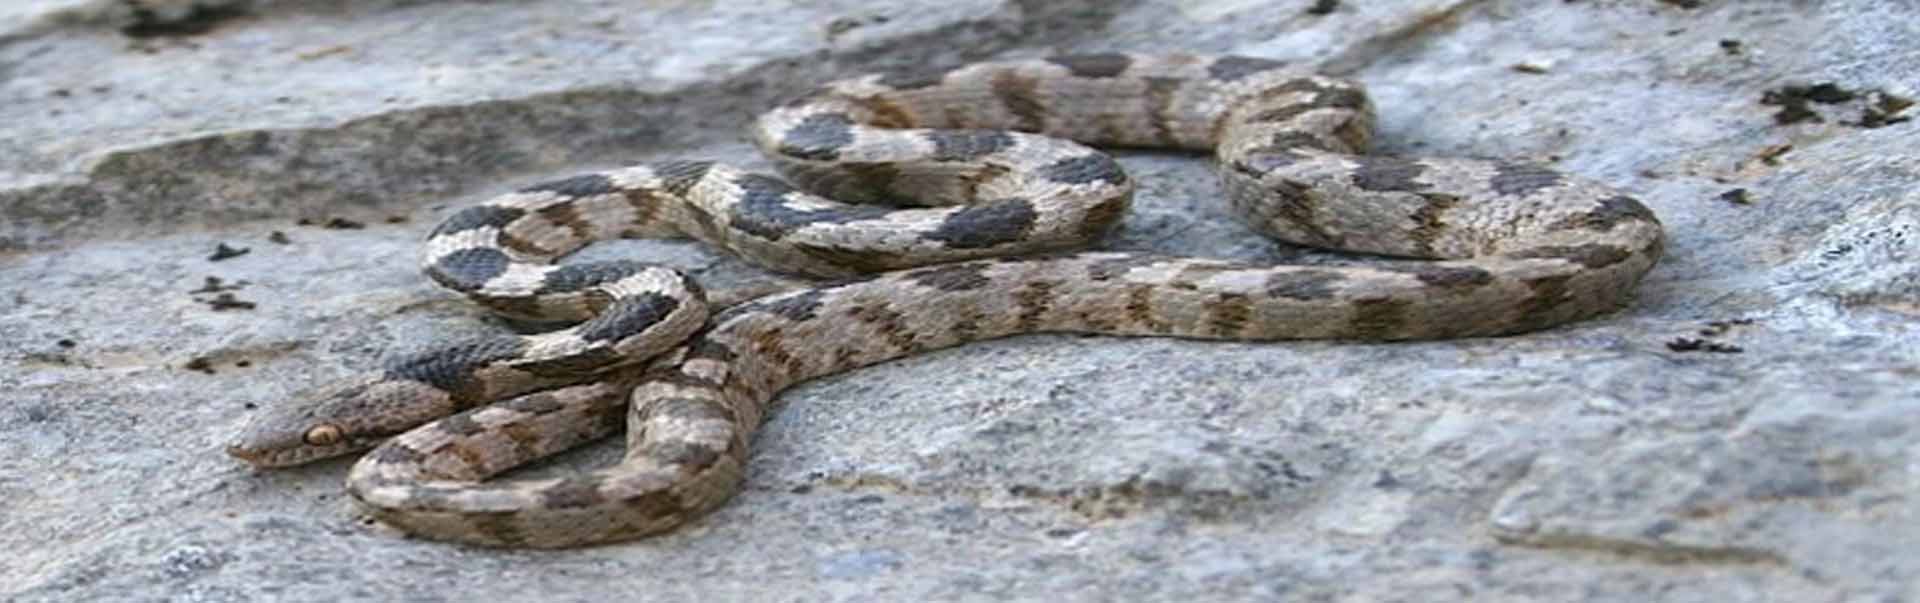 The Cyprus Cat Snake